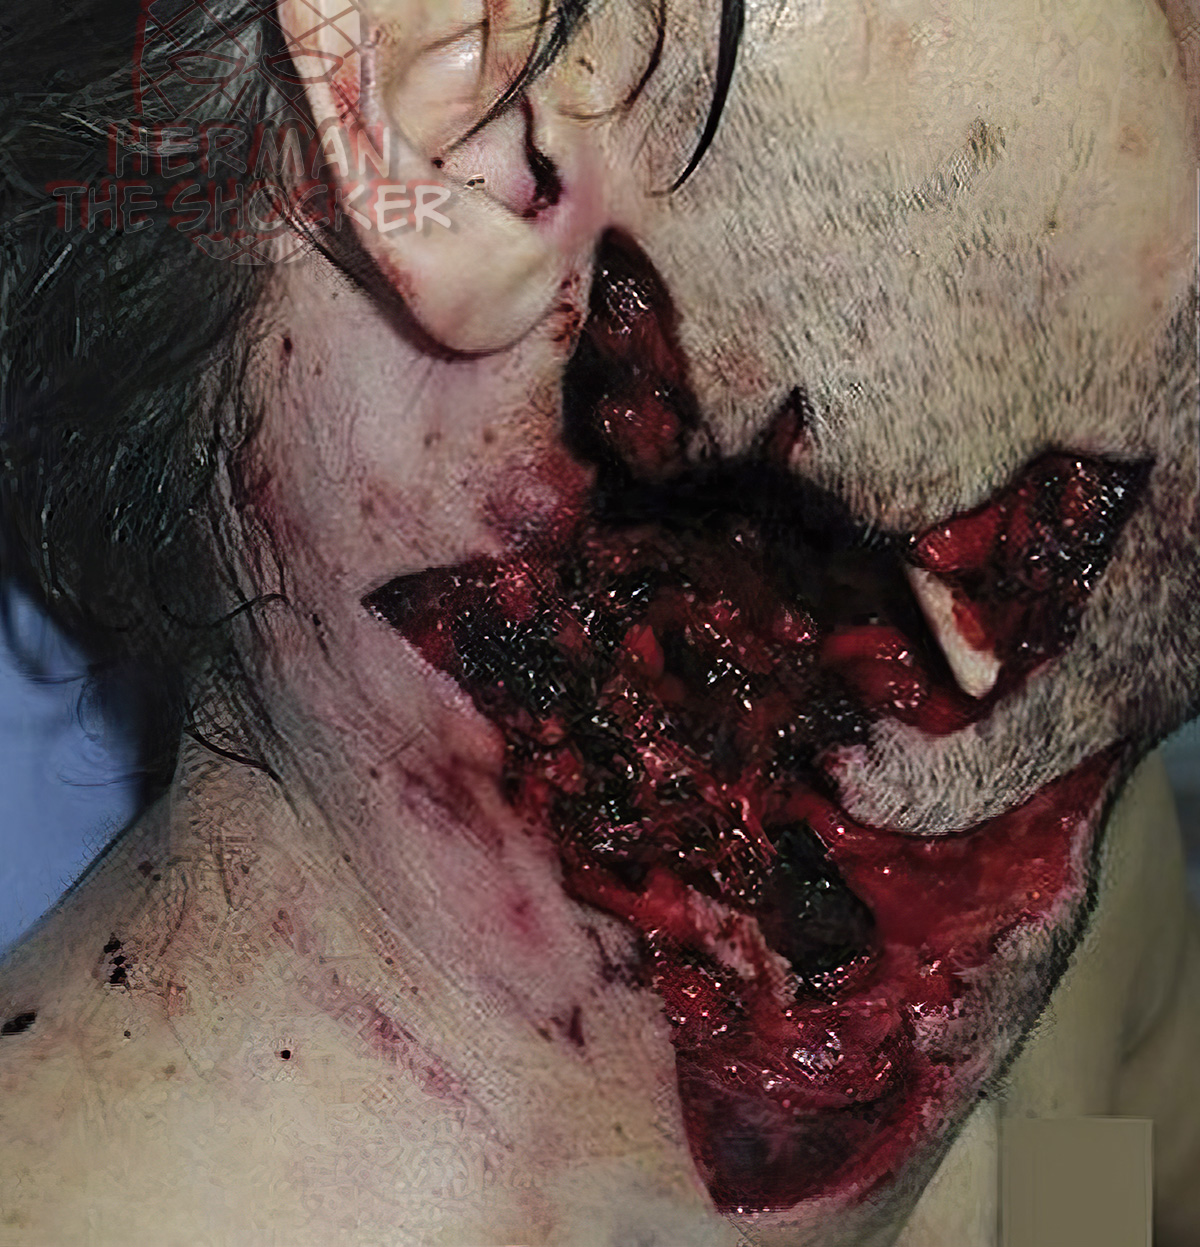 Death from a gunshot wound to the neck